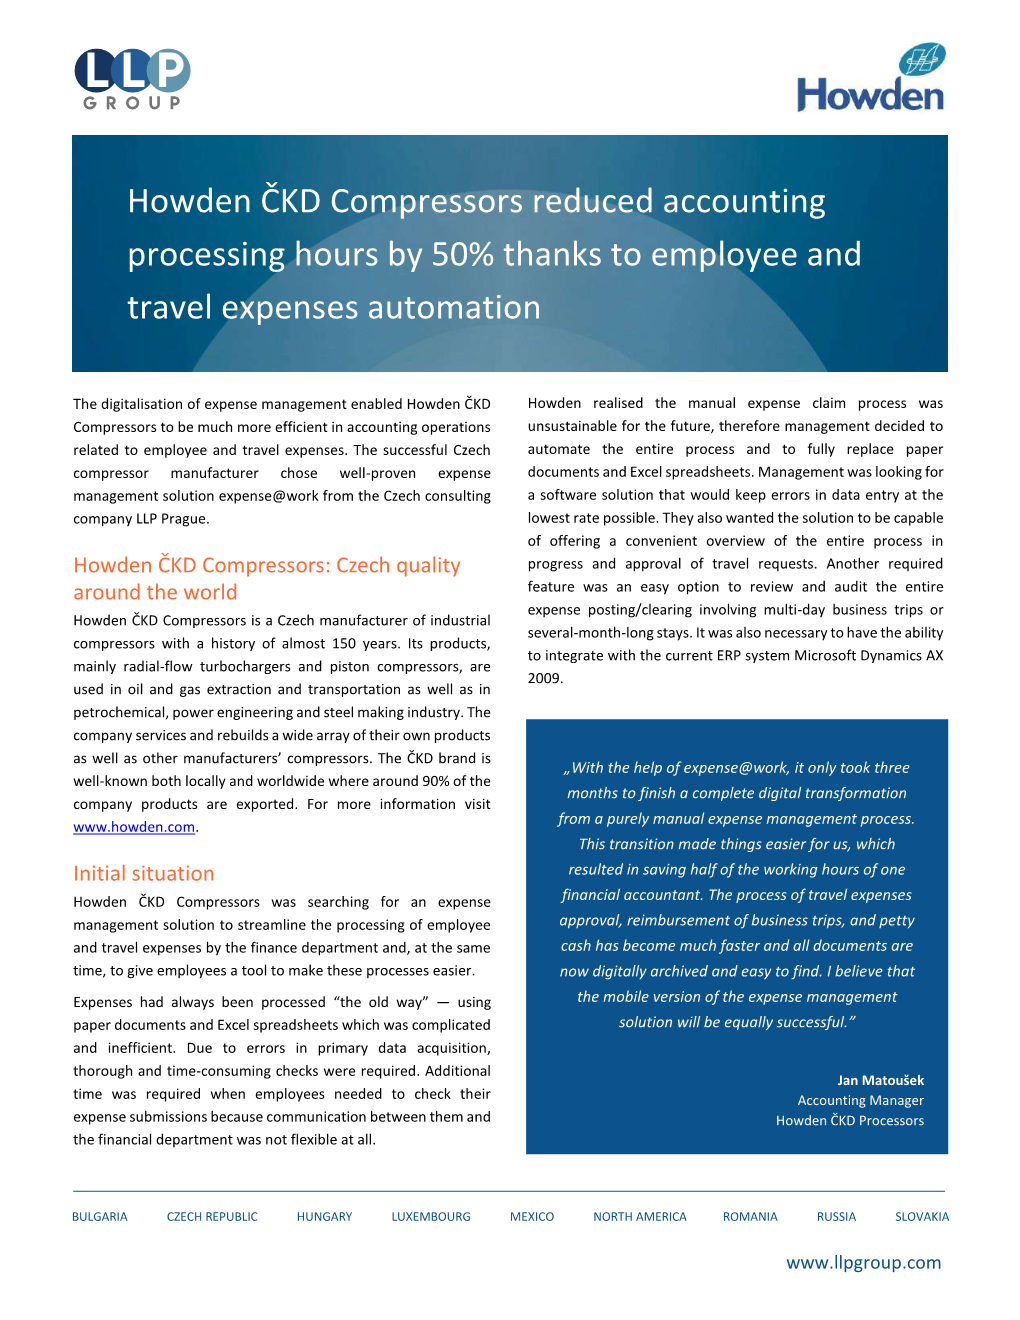 Howden ČKD Compressors Reduced Accounting Processing Hours by 50% Thanks to Employee and Travel Expenses Automation